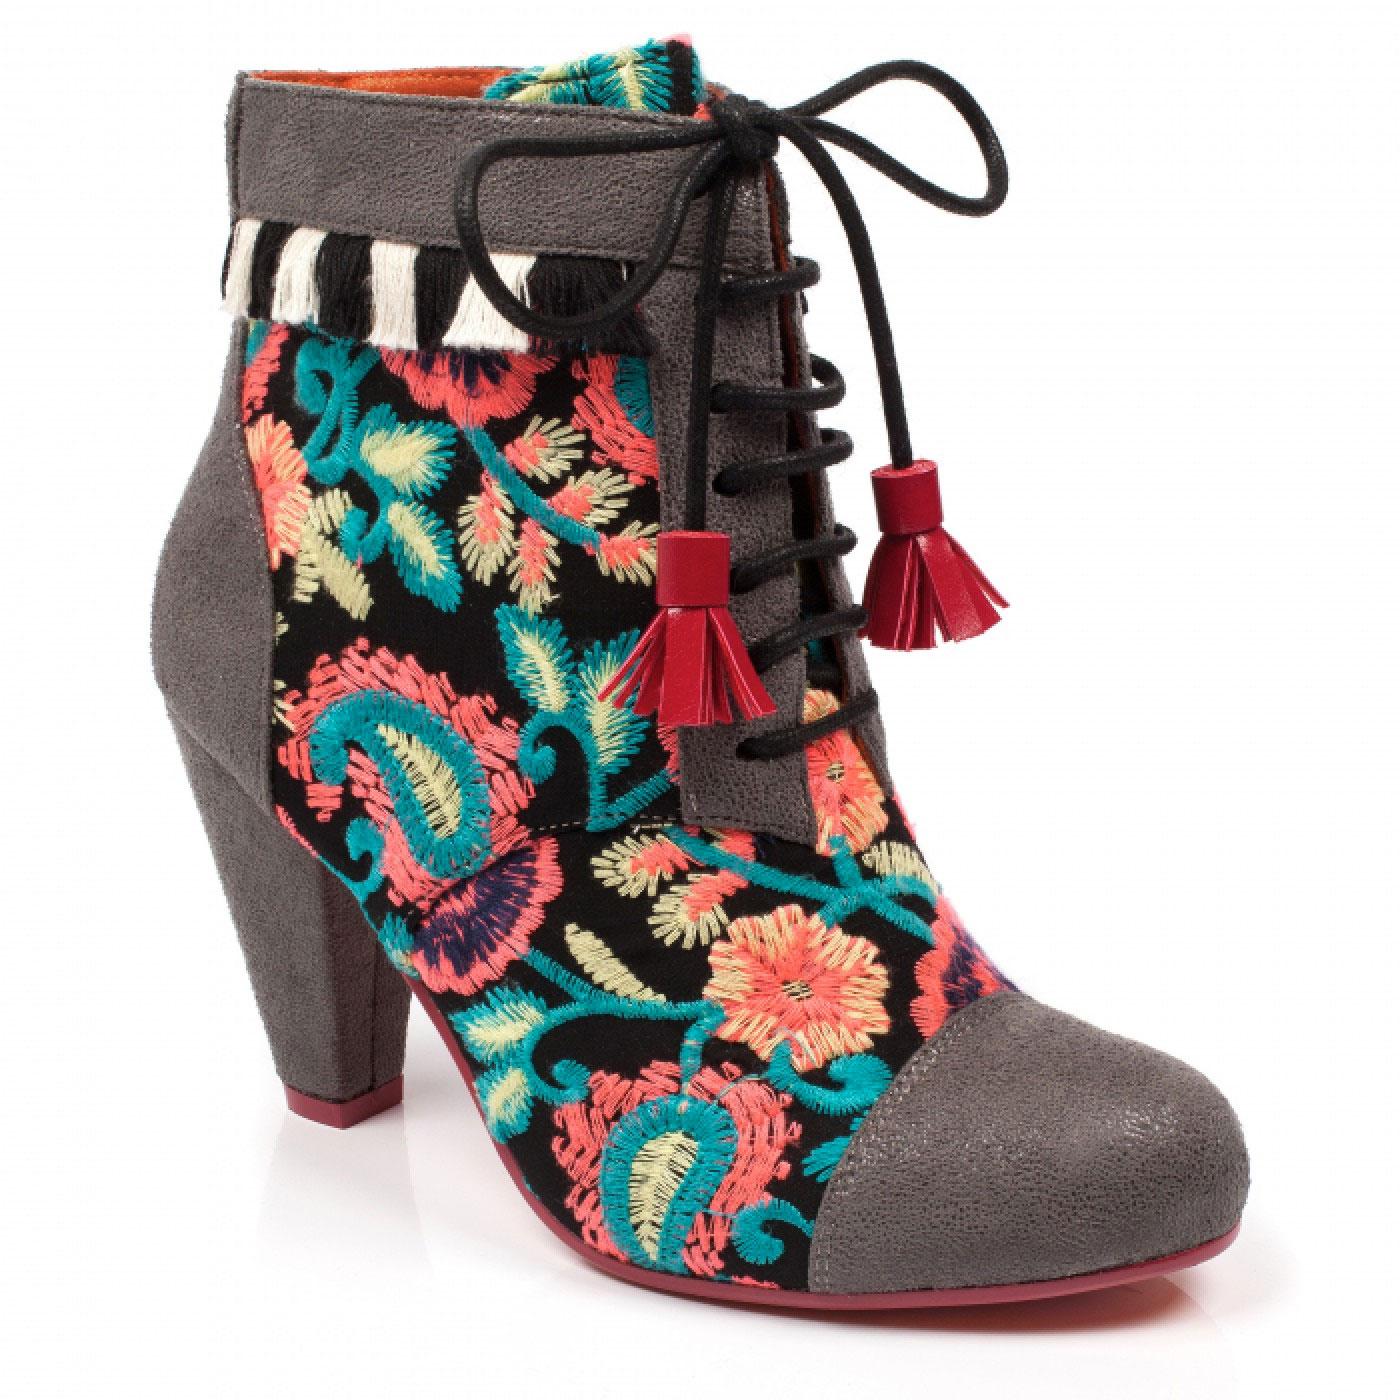 Winters Tale POETIC LICENCE 1960s Paisley Boots